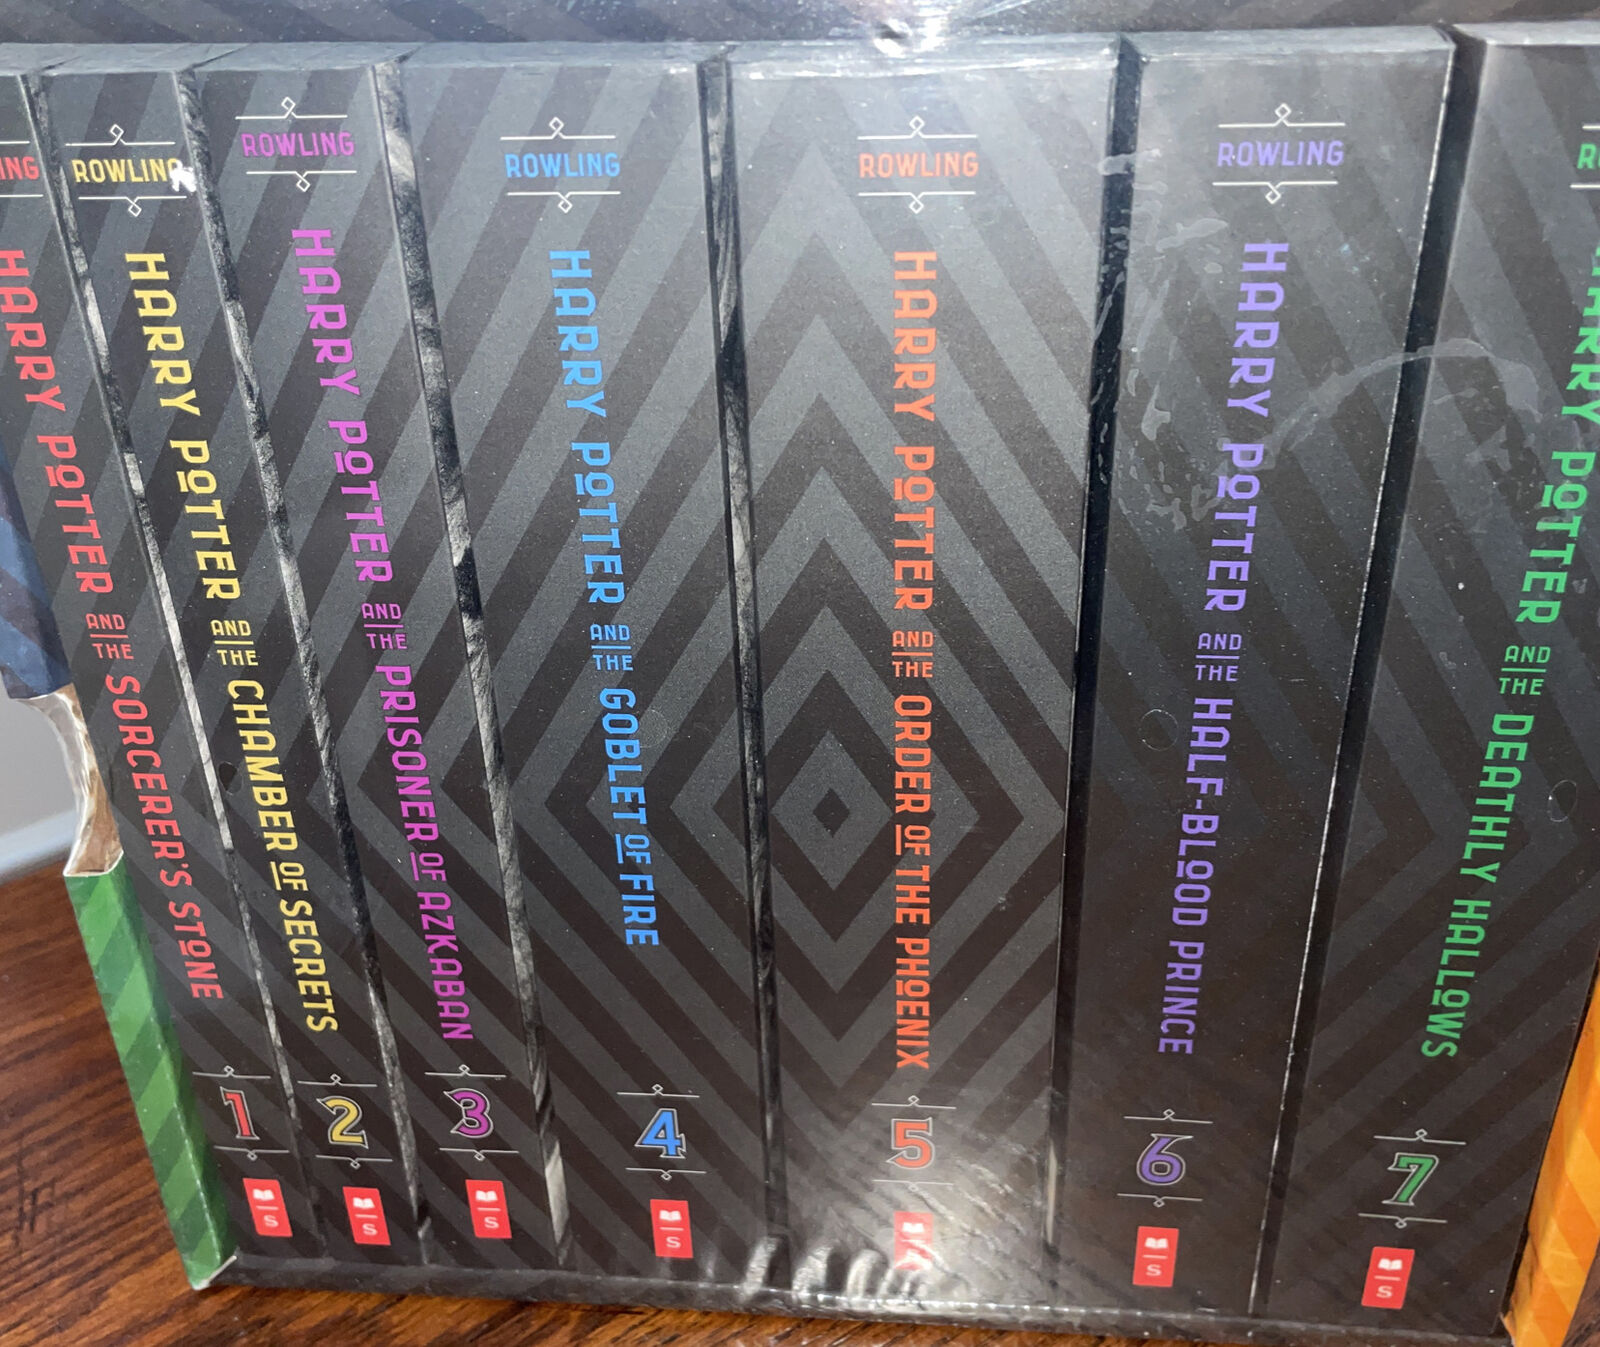 Harry Potter Books - Complete 7 Volume Series - Salani Publisher New  Articles